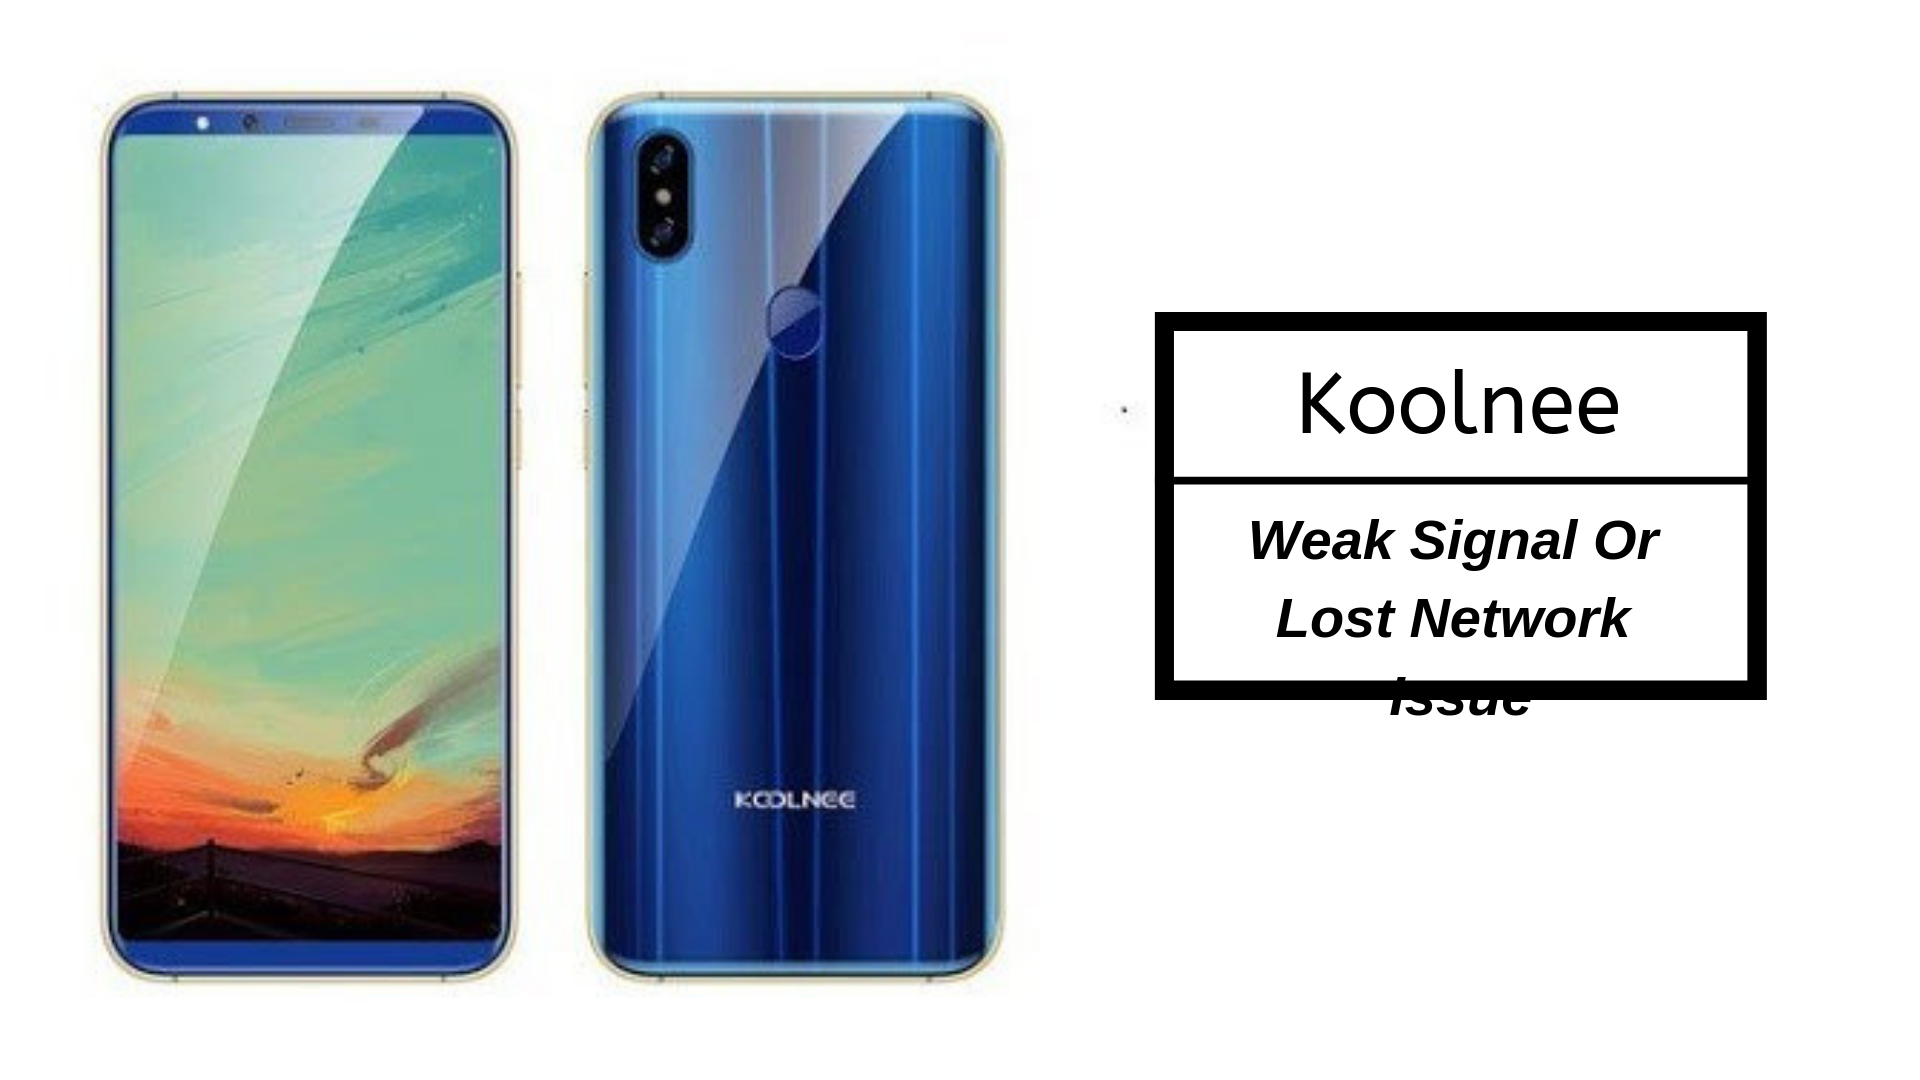 Guide To Fix Koolnee Weak Signal Or Lost Network Issue